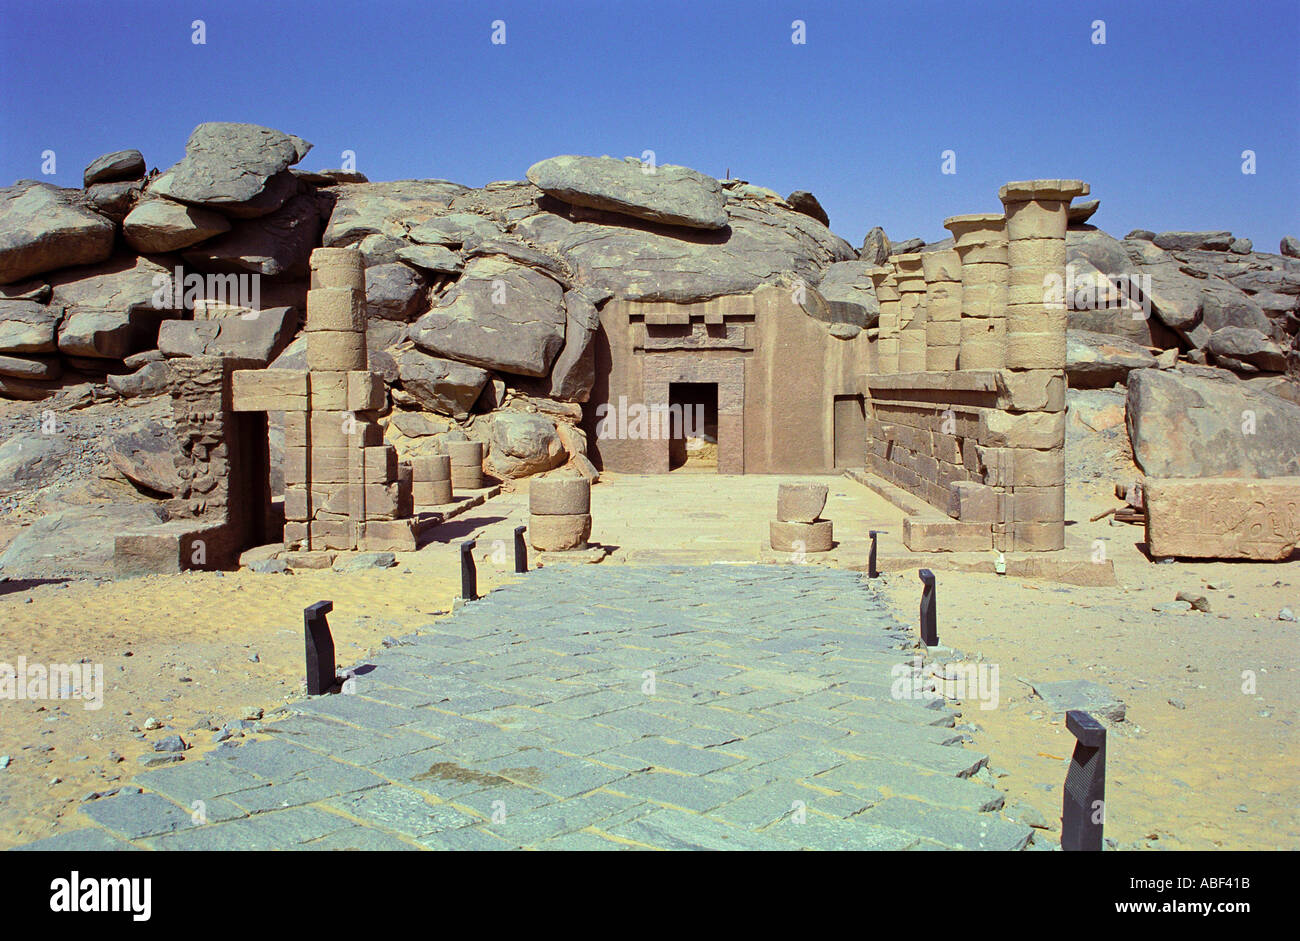 Temple of the Nubian god Dedwen. Located at New Kalabsha since it was moved from the rising waters of Lake Nasser. Stock Photo